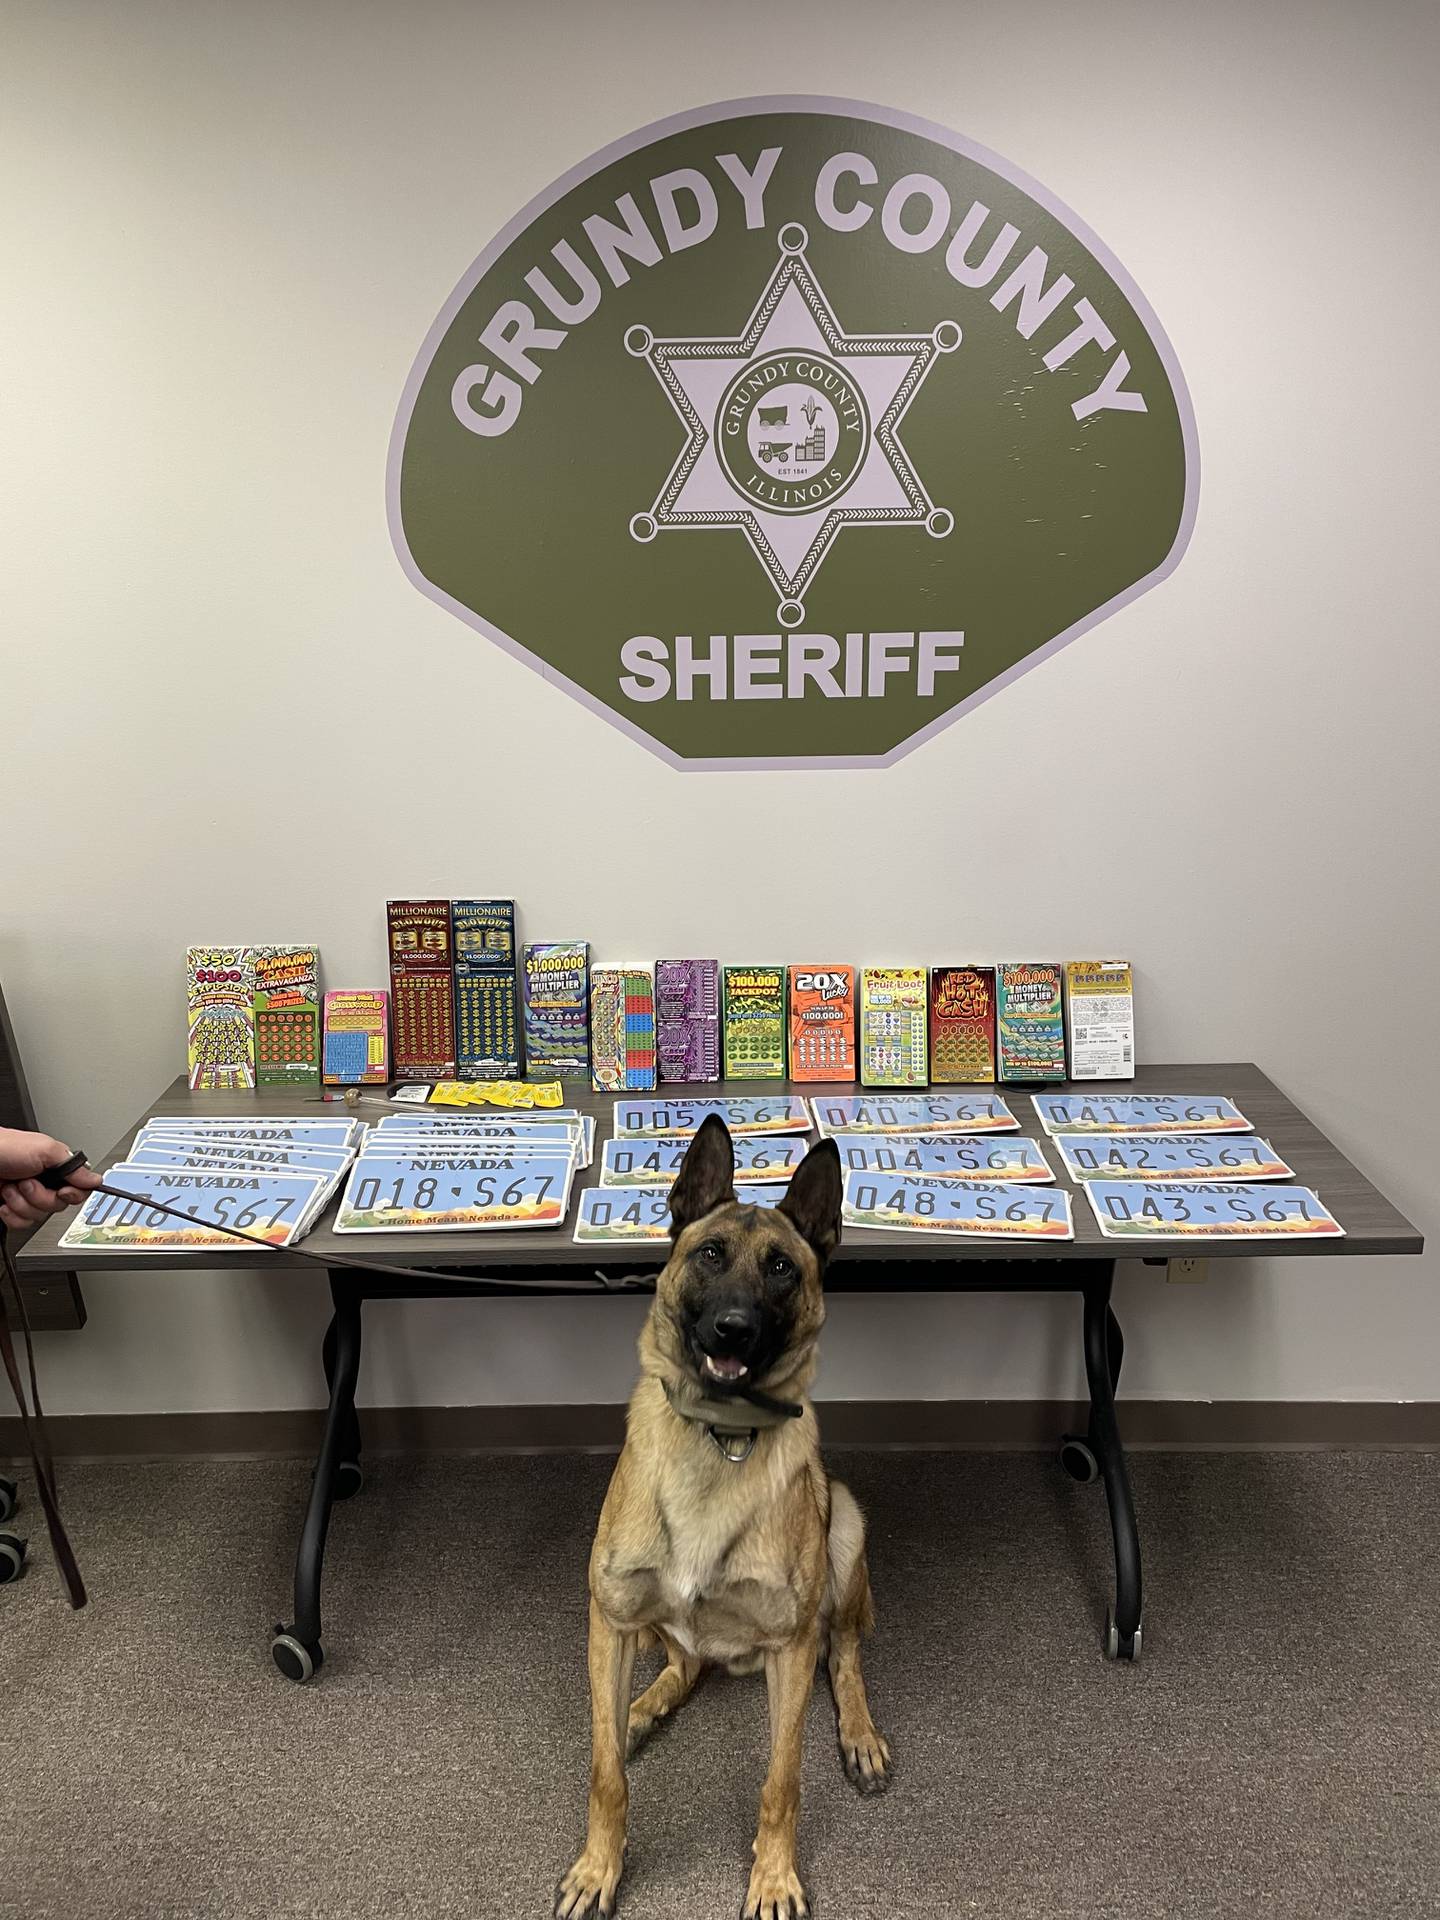 During a search of the vehicle, deputies located 8 dosage units of Suboxone, a controlled substance, 416 Missouri Lottery Scratch-Off Tickets, the glass smoking pipe, and 37 Nevada license plates. Stankewitz did not possess a prescription for the Suboxone, according to the release.